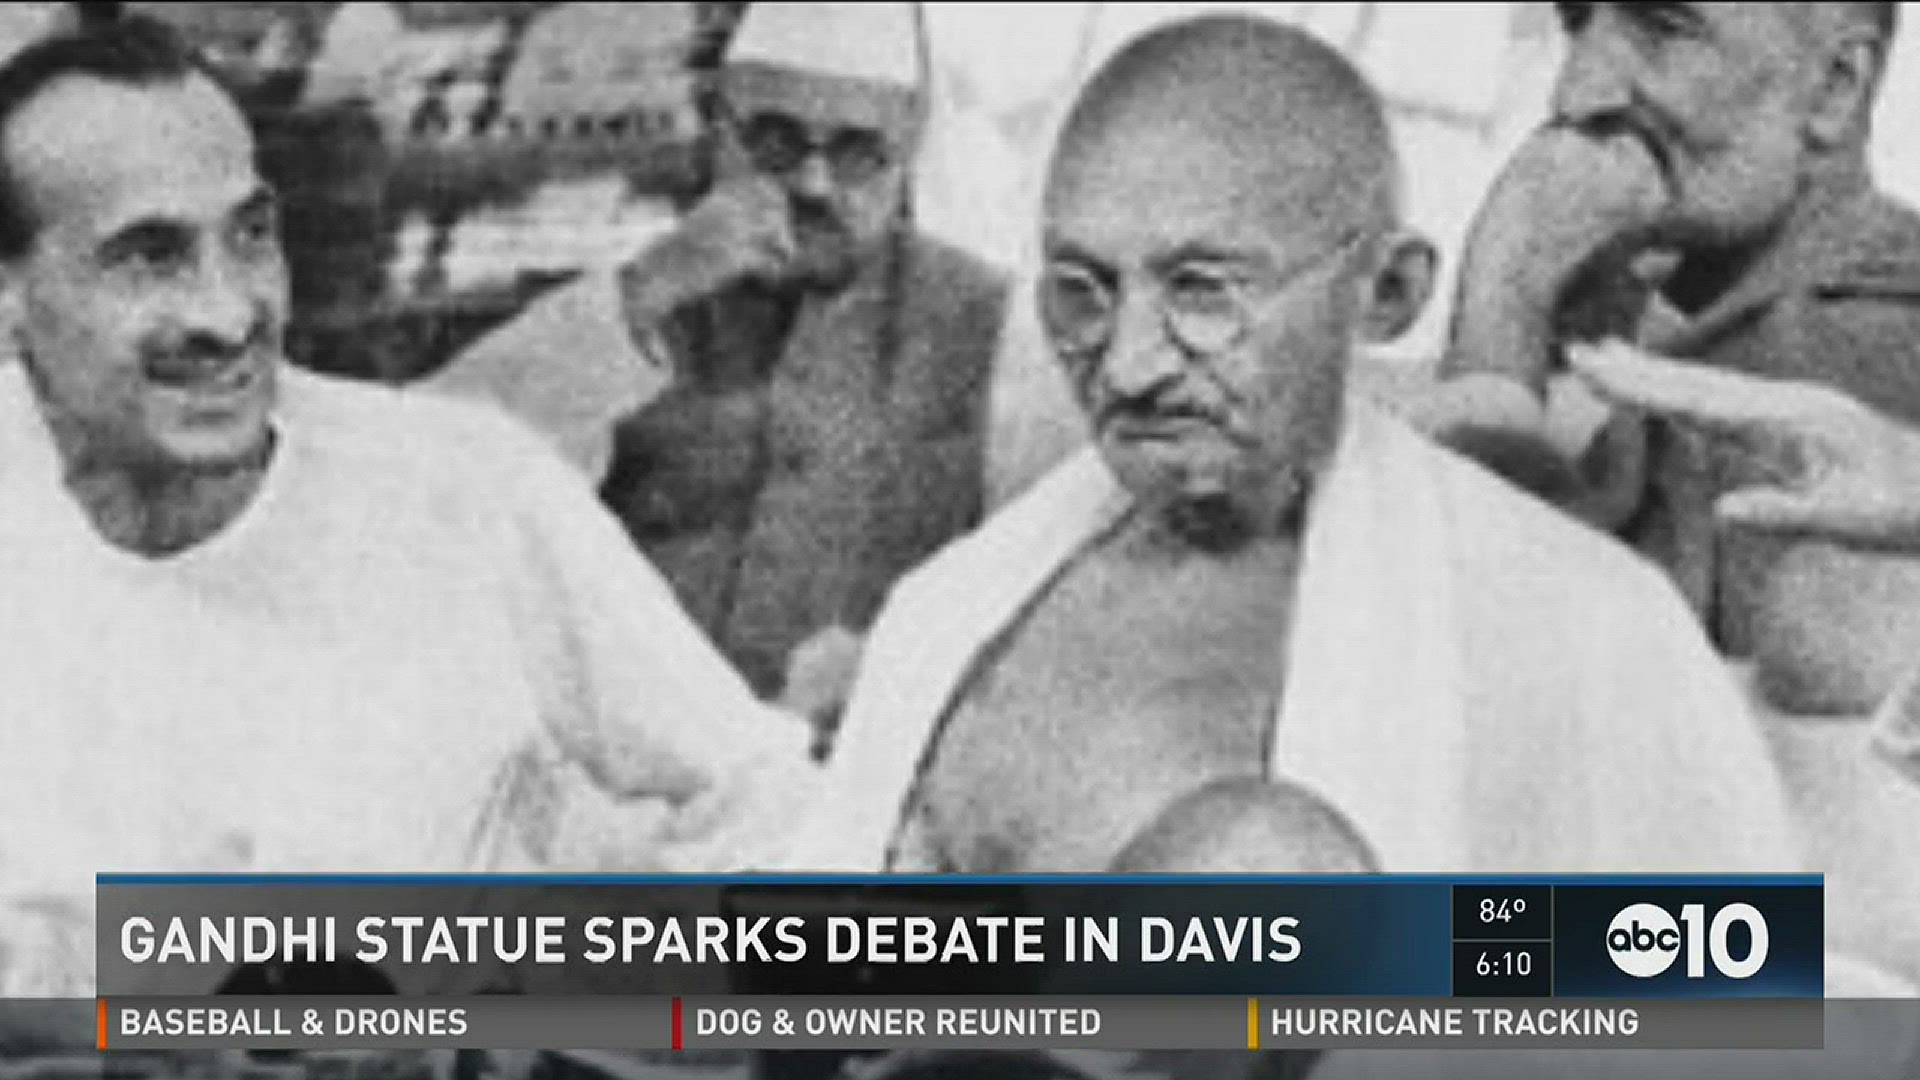 A proposed statue of Gandhi for a Davis park has sparked controversy. (September 1, 2016)